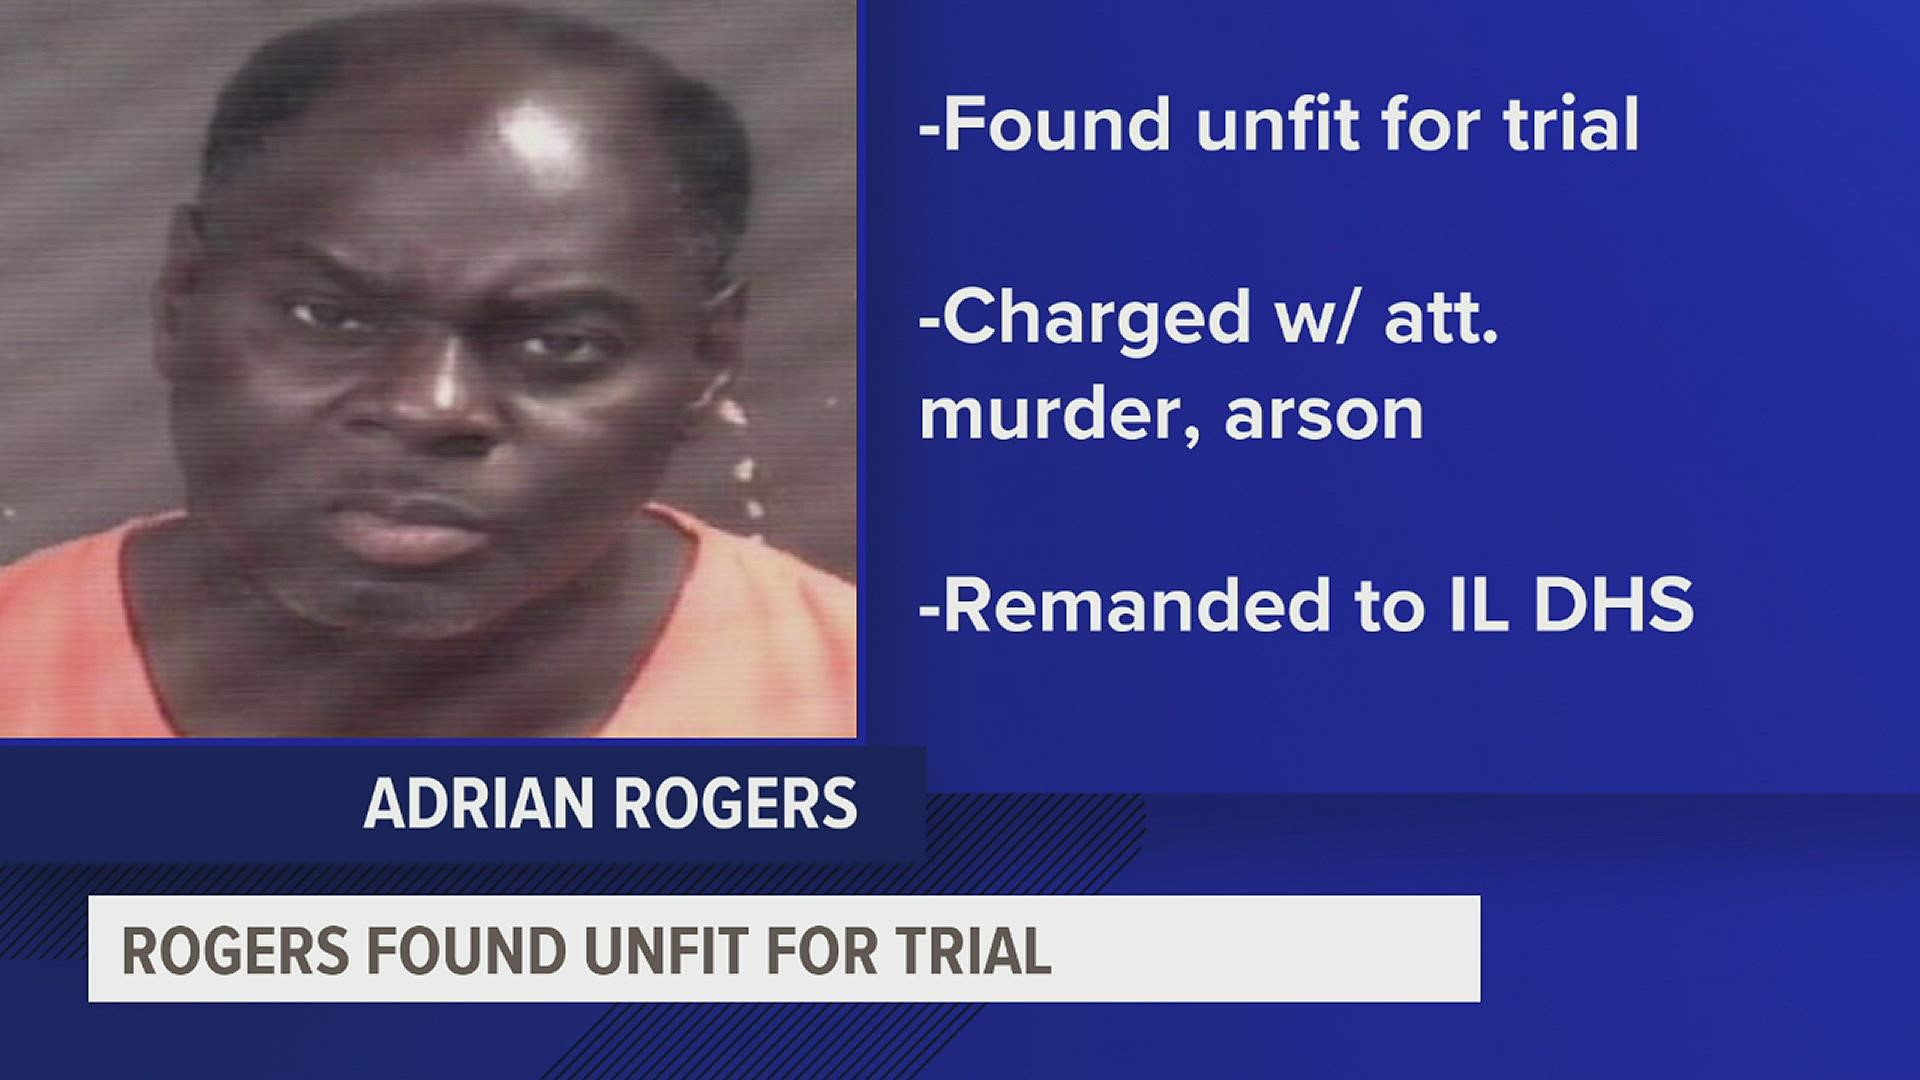 Adrian Rogers' hearing was held in the Rock Island jail for "the defendant and jail personnel's safety" on Wednesday afternoon.